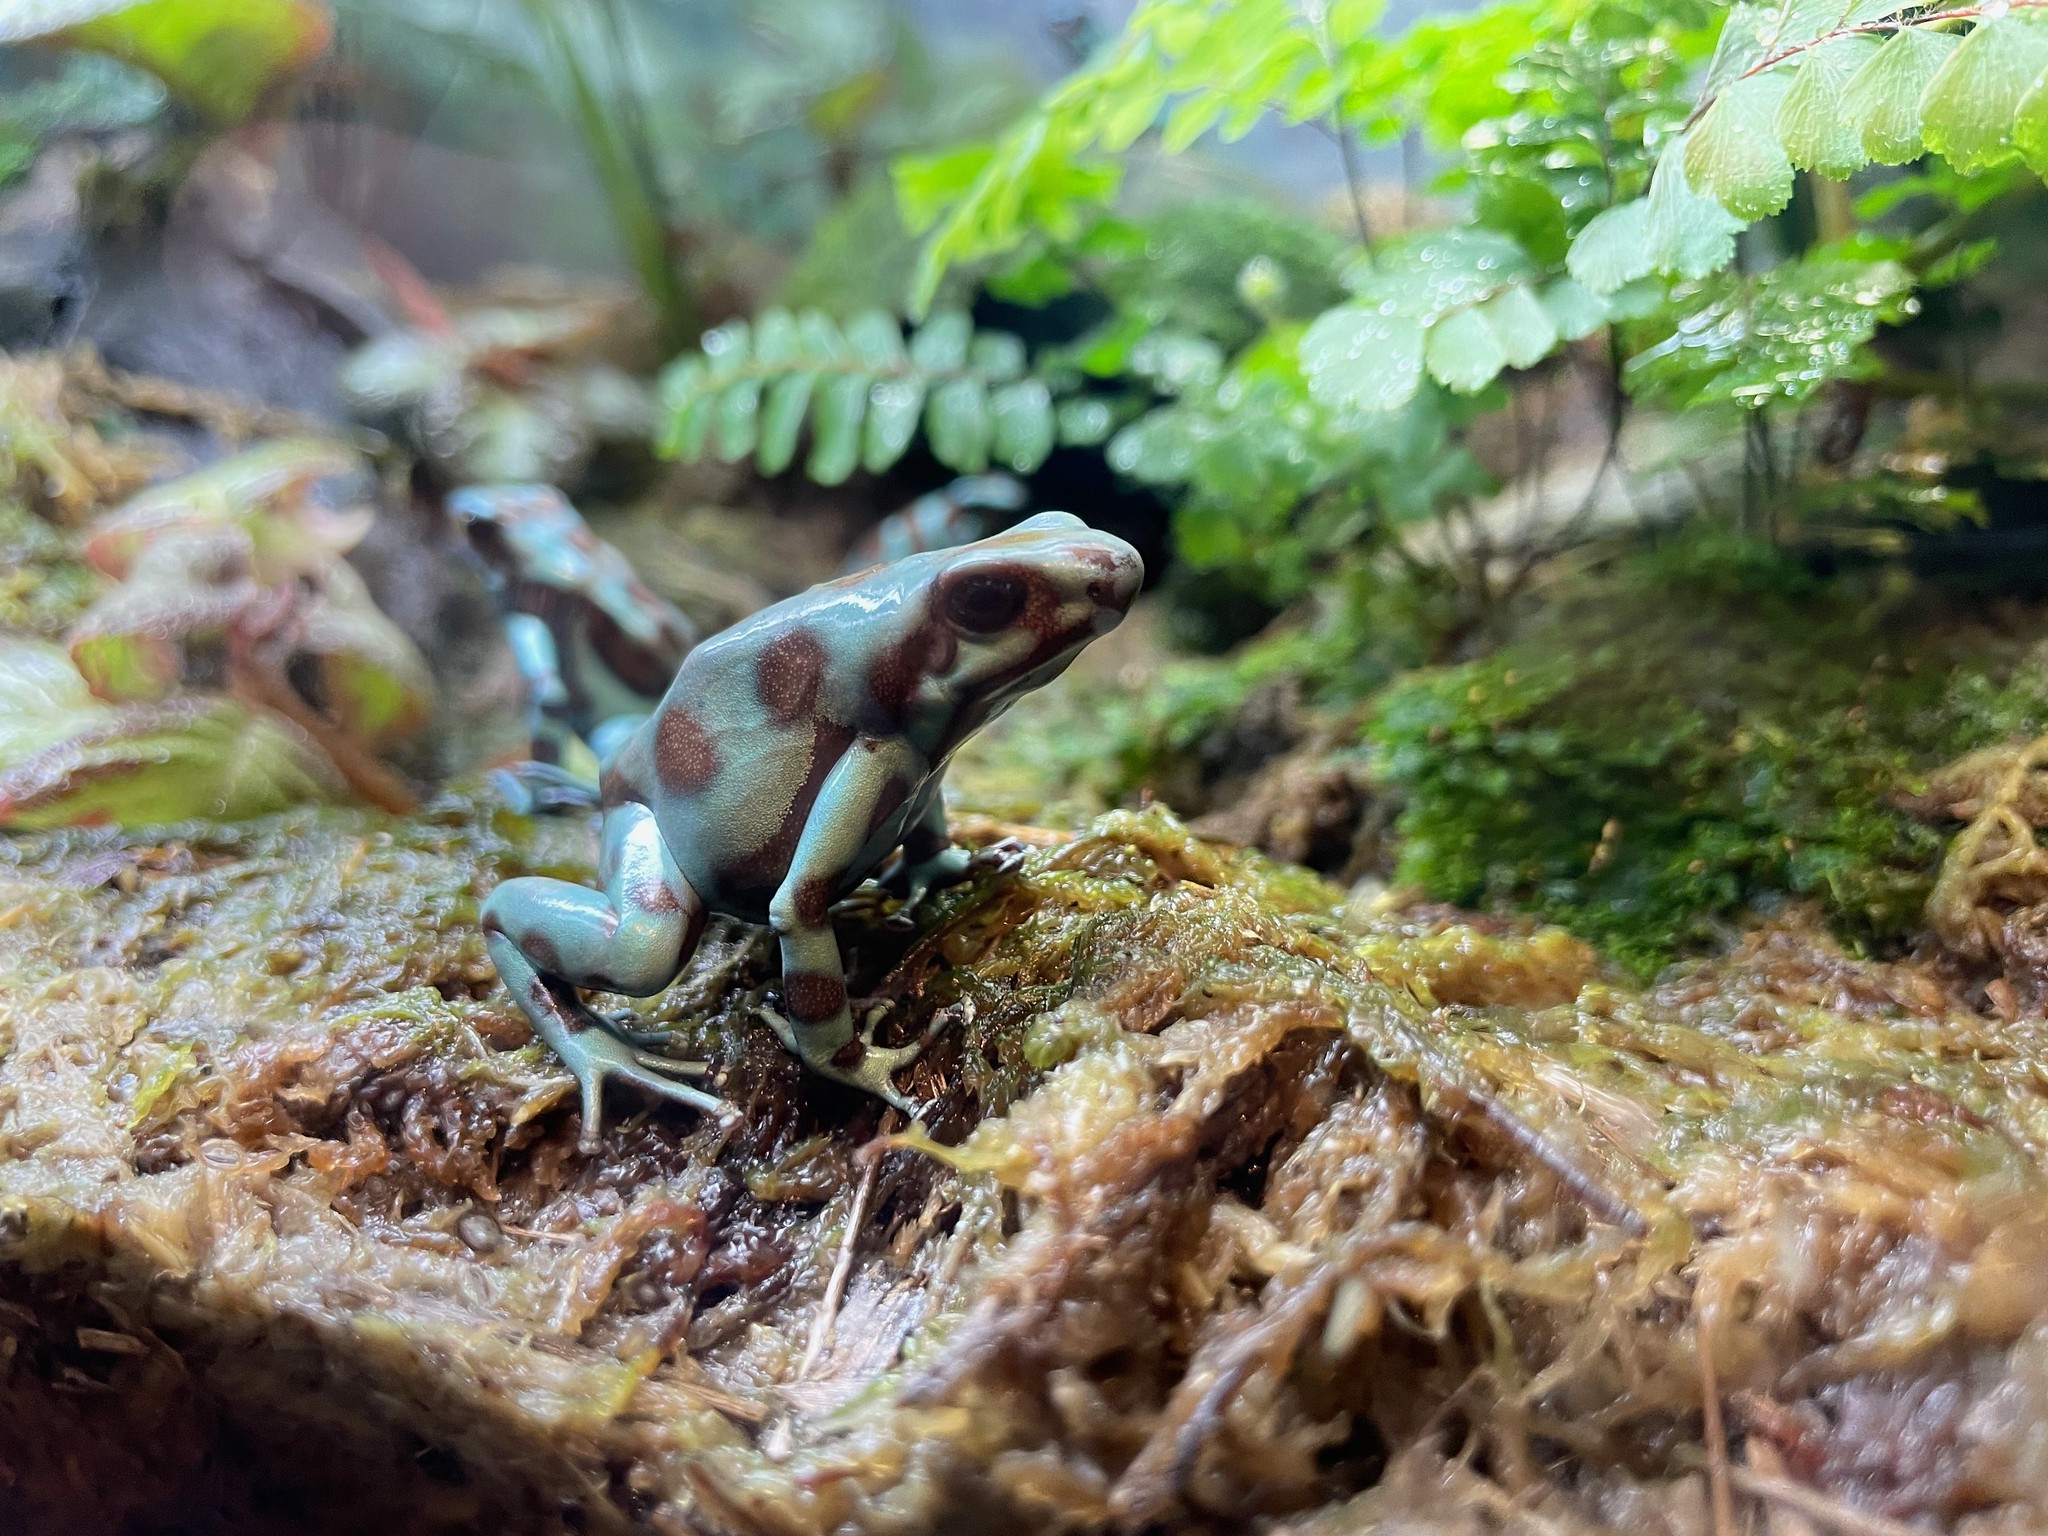 A mottled green and brown tree frog sitting on mossy ground with fern fronds in the background